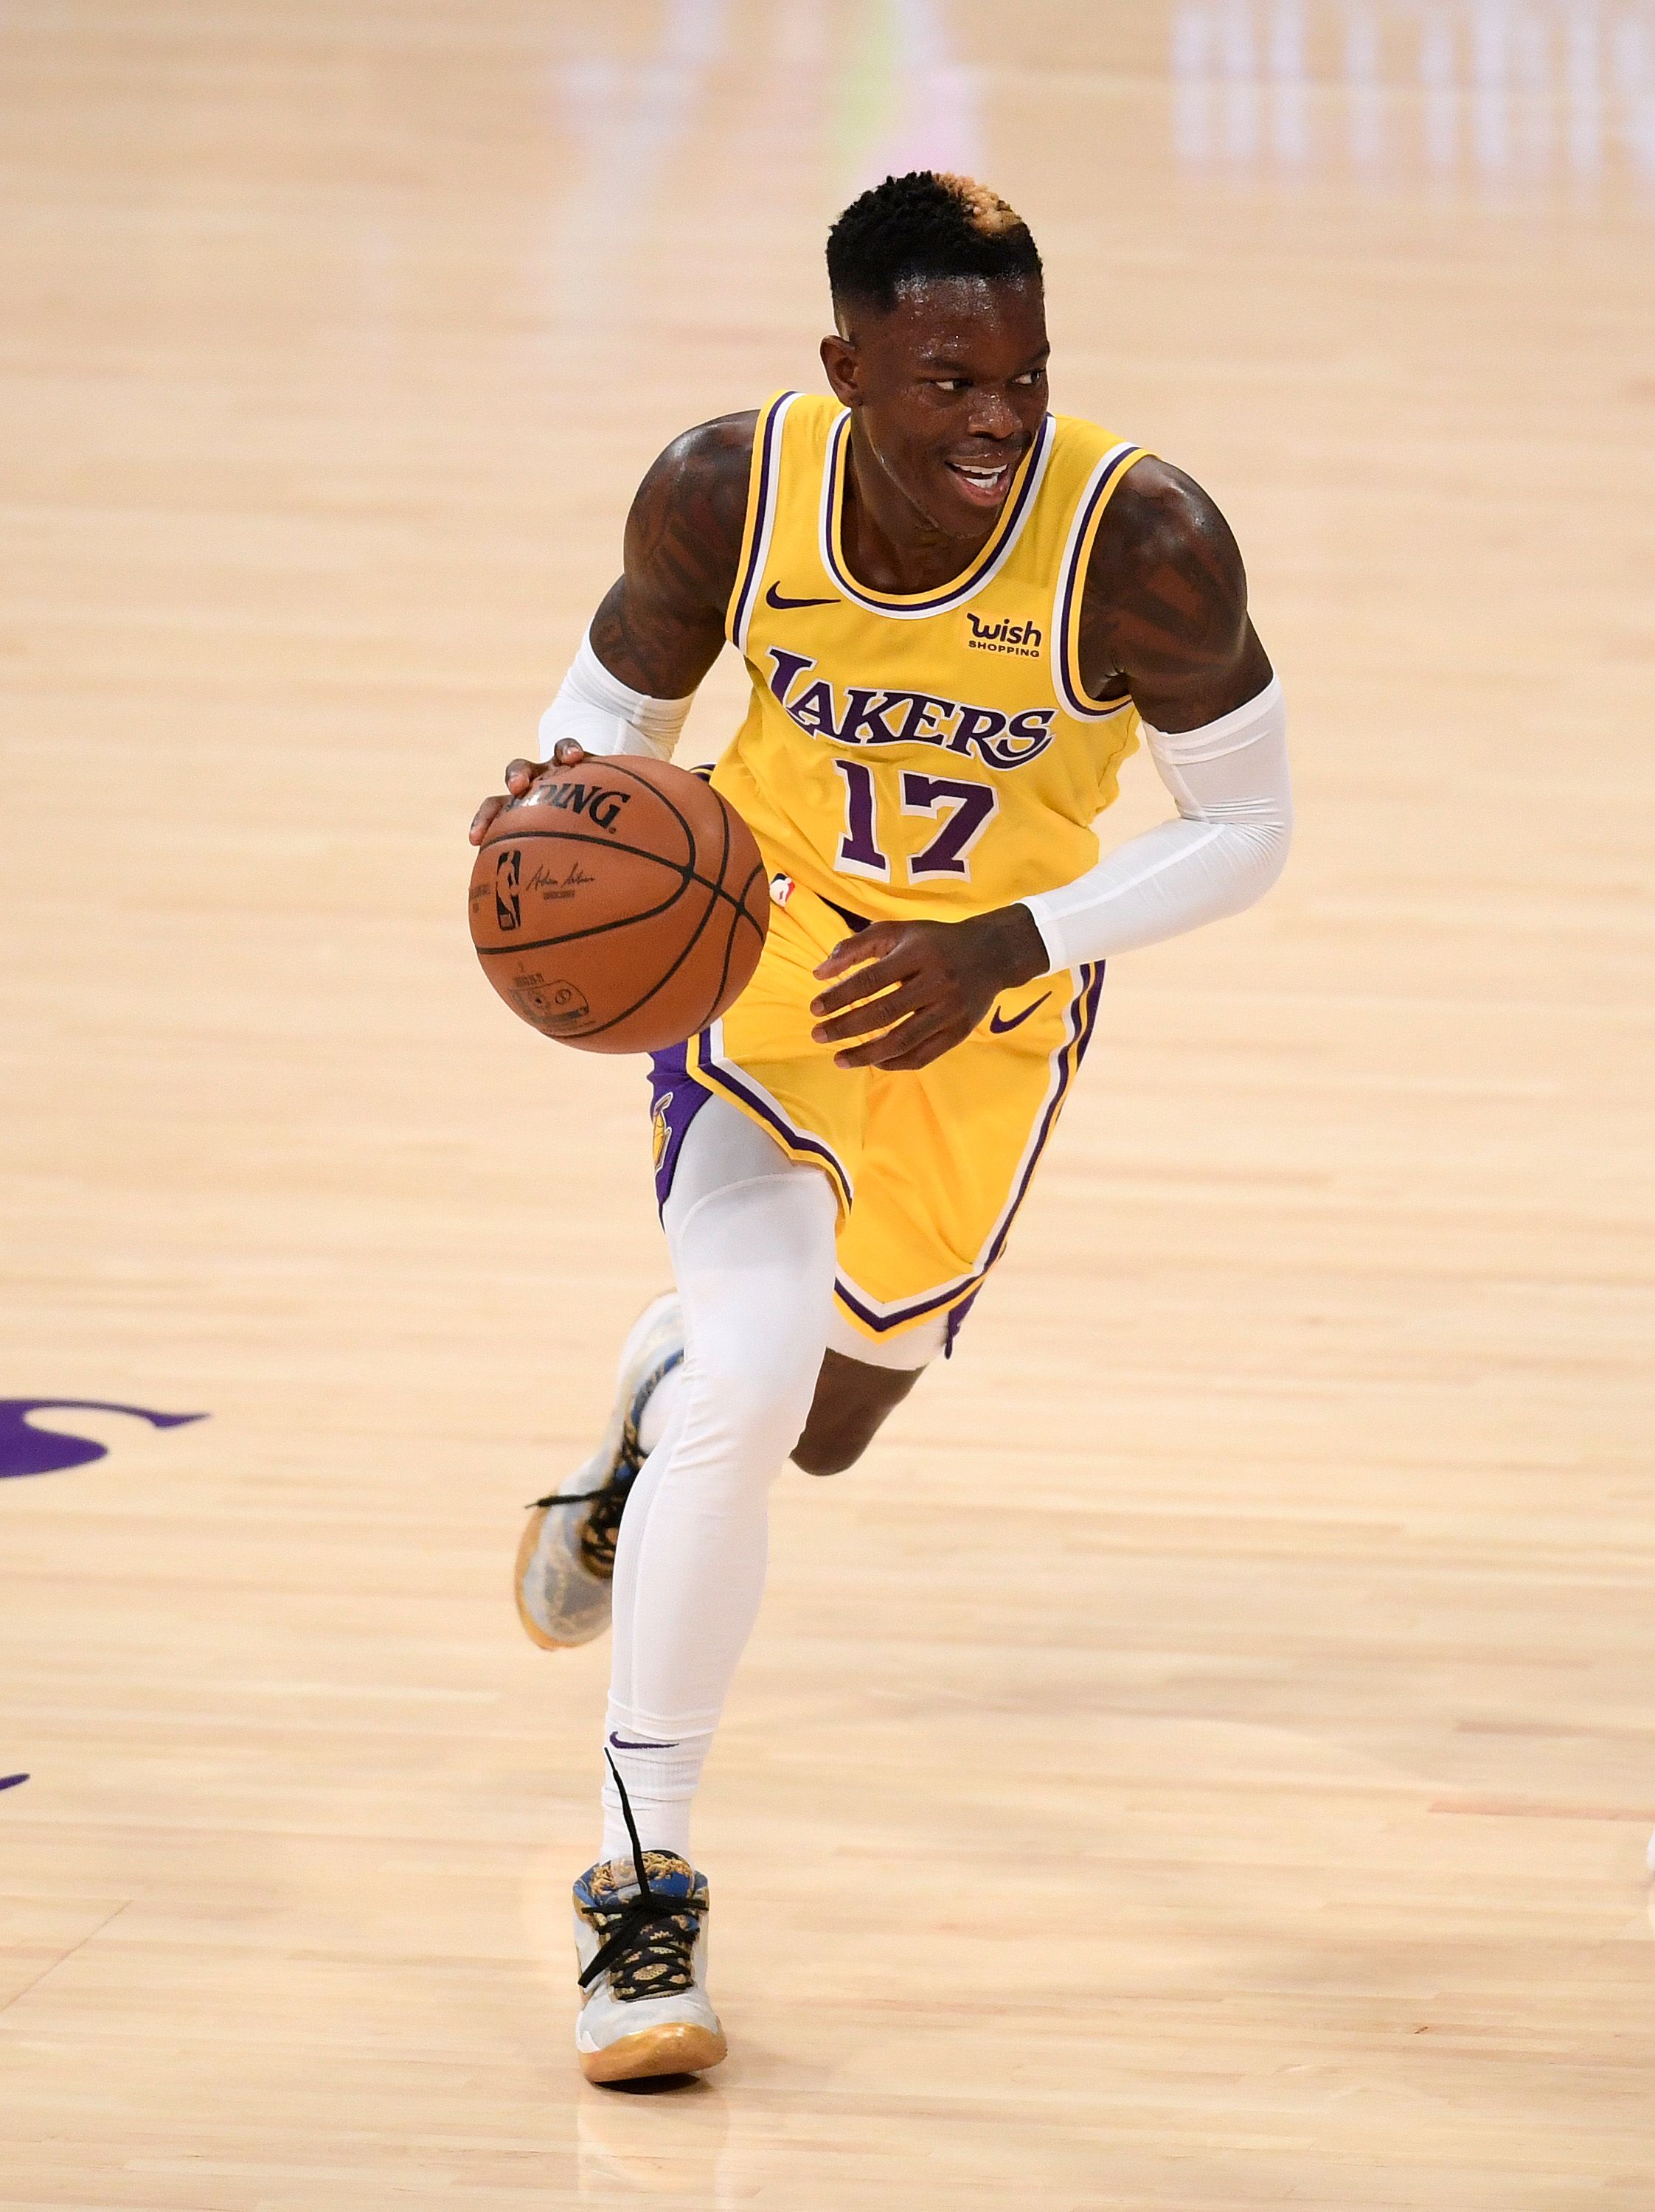 Dennis Schroder making plays for the Lakers